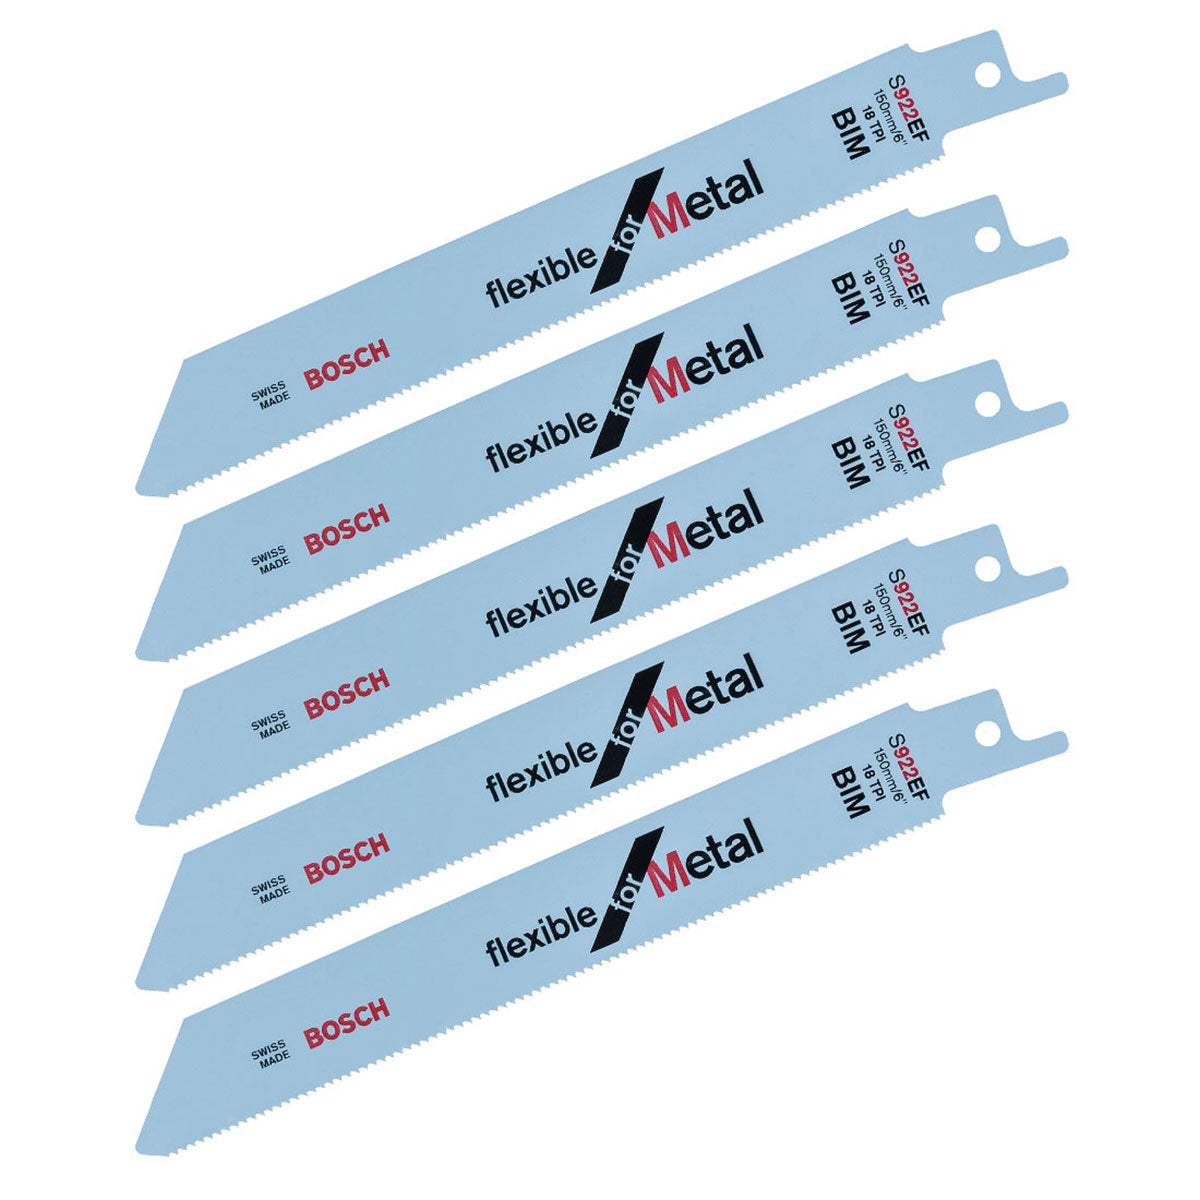 Bosch S922EF 150mm BIM Flexible Reciprocating Saw Blades for Metal Pack of 5 - 2608656015